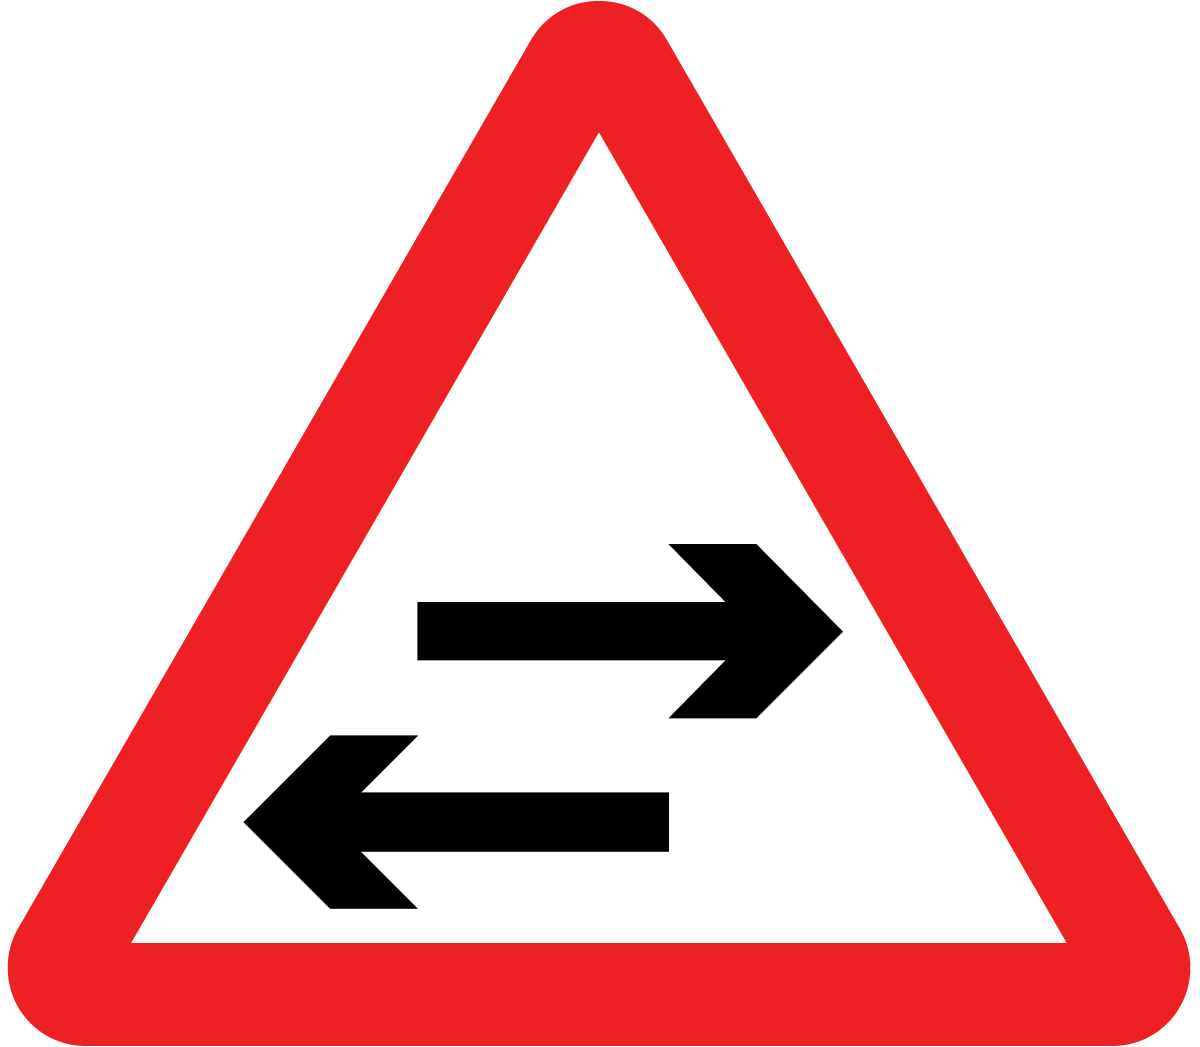 two way traffic sign means